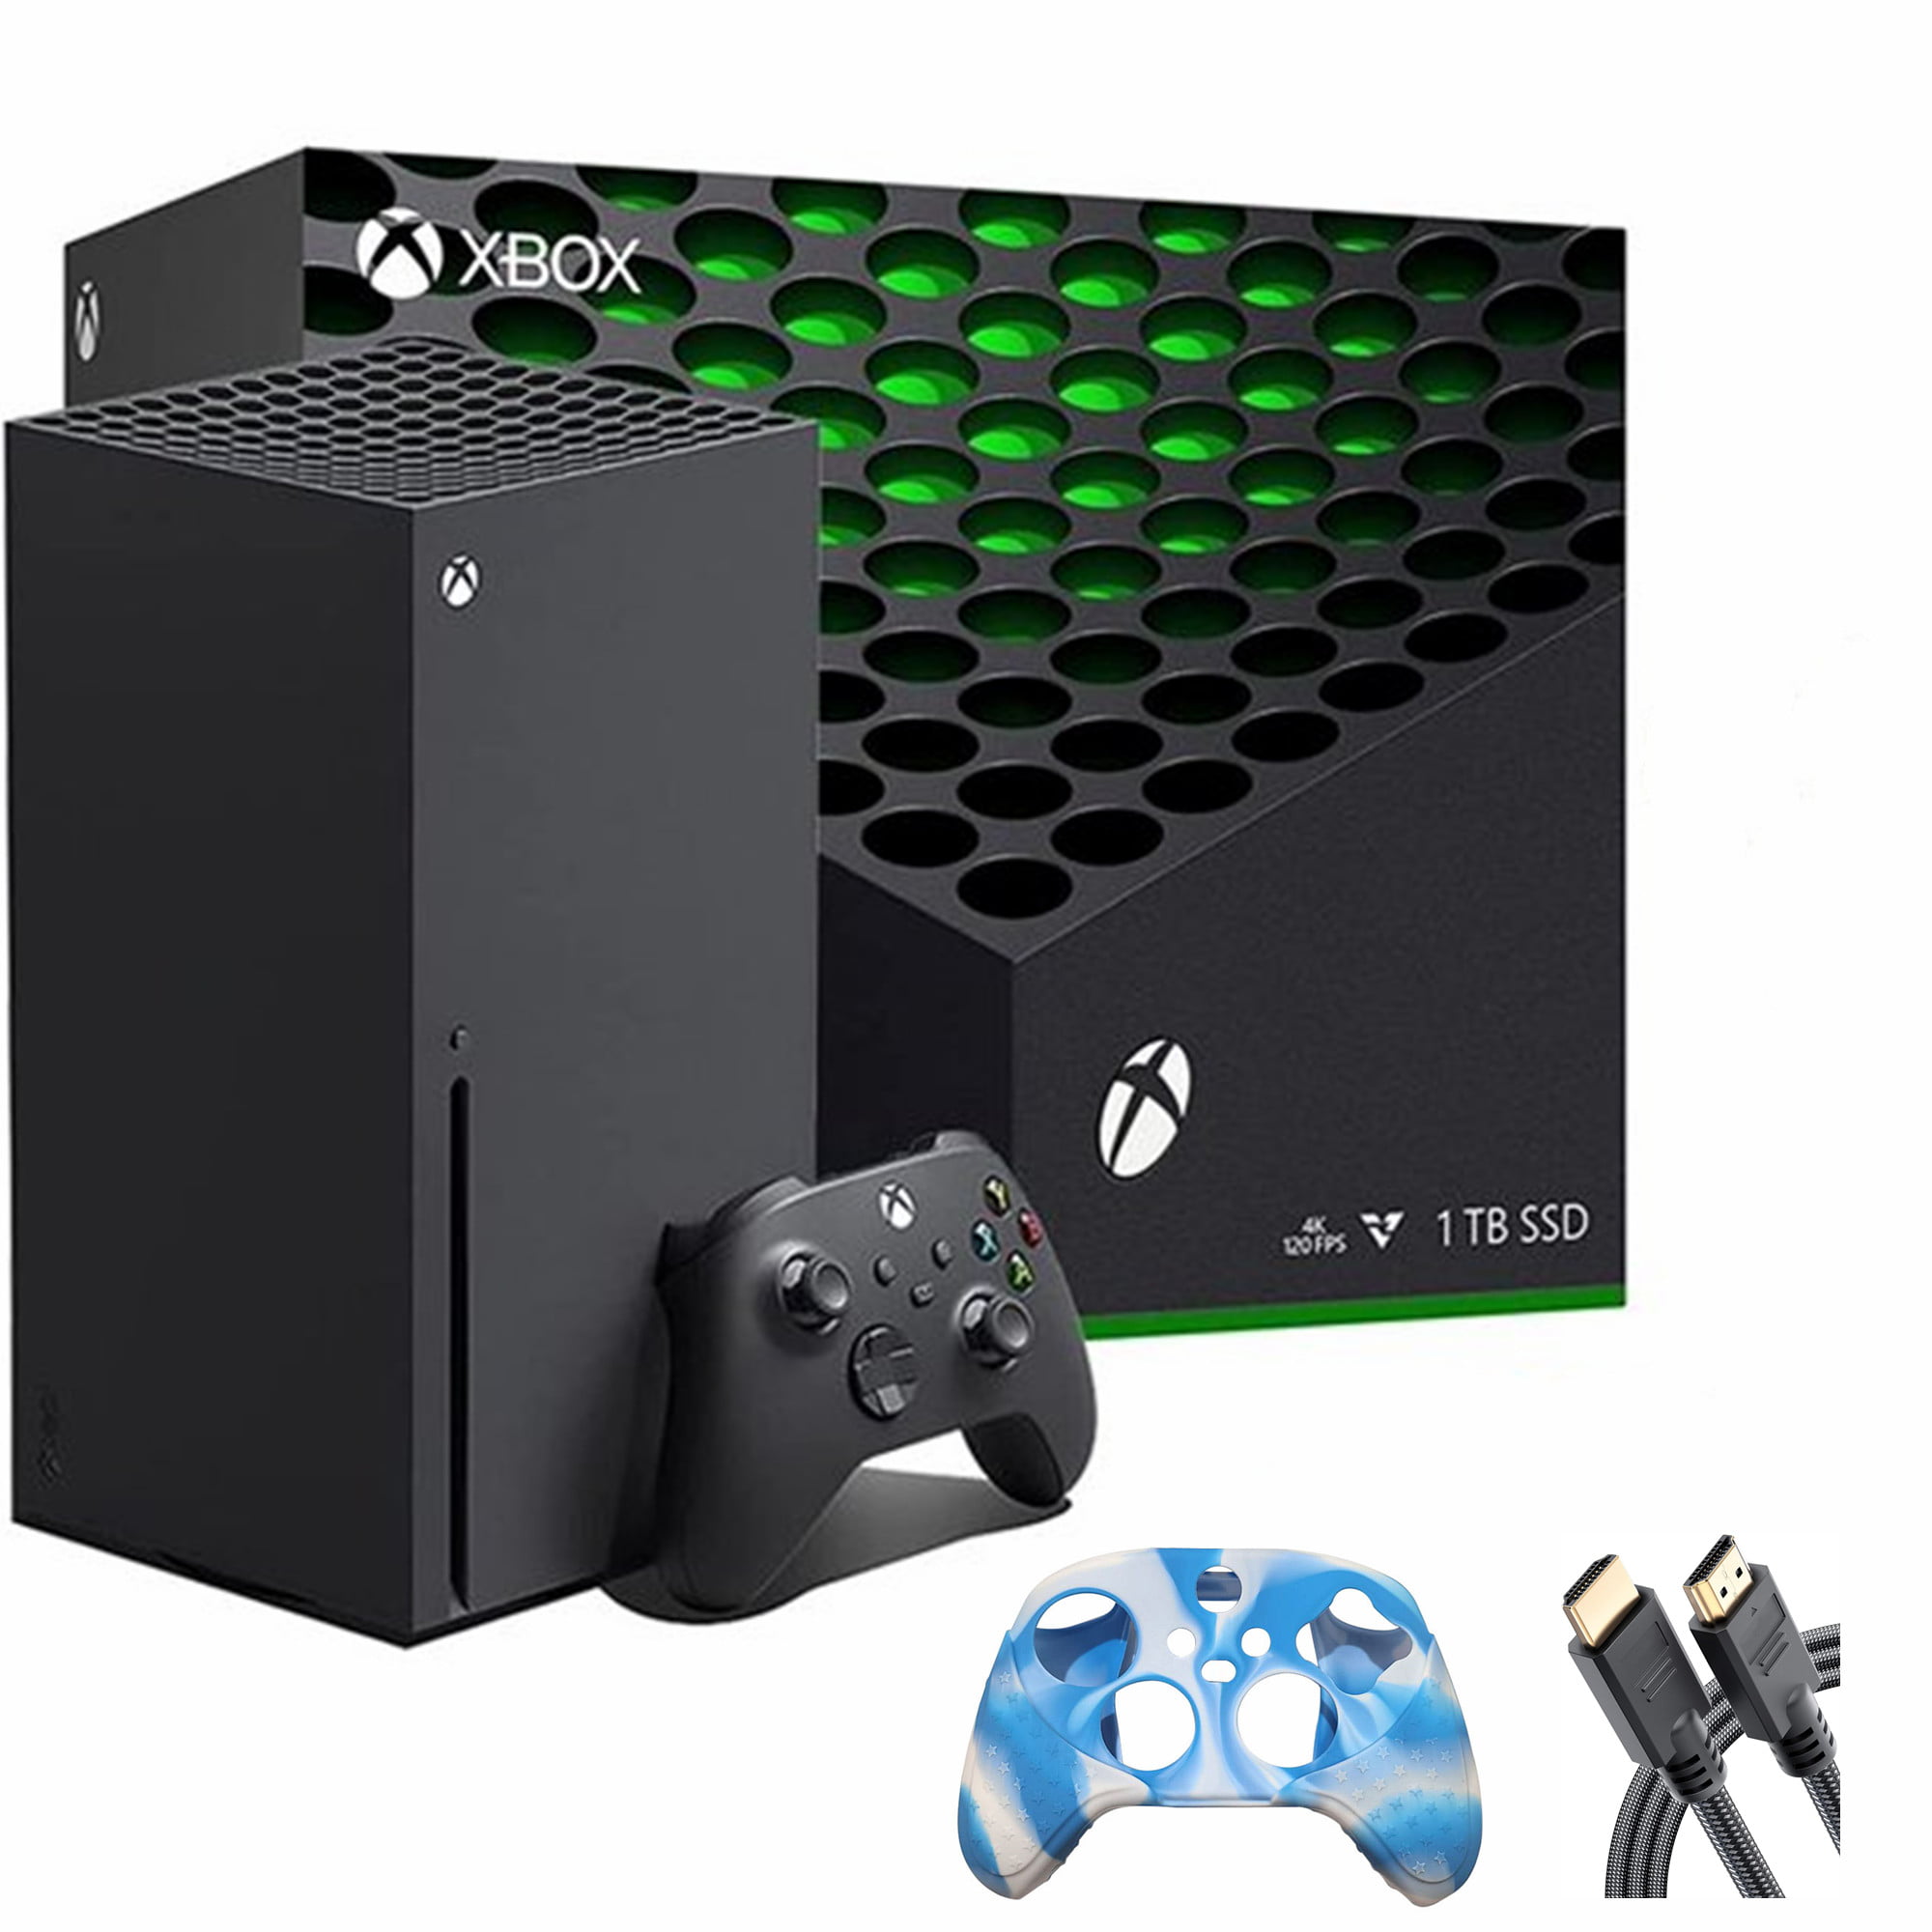 Microsoft Xbox Series X 1TB SSD Gaming Console with 1 Xbox Wireless  Controller - Black, 2160p Resolution, 8K HDR, Wi-Fi, w/Silicone Controller  Cover